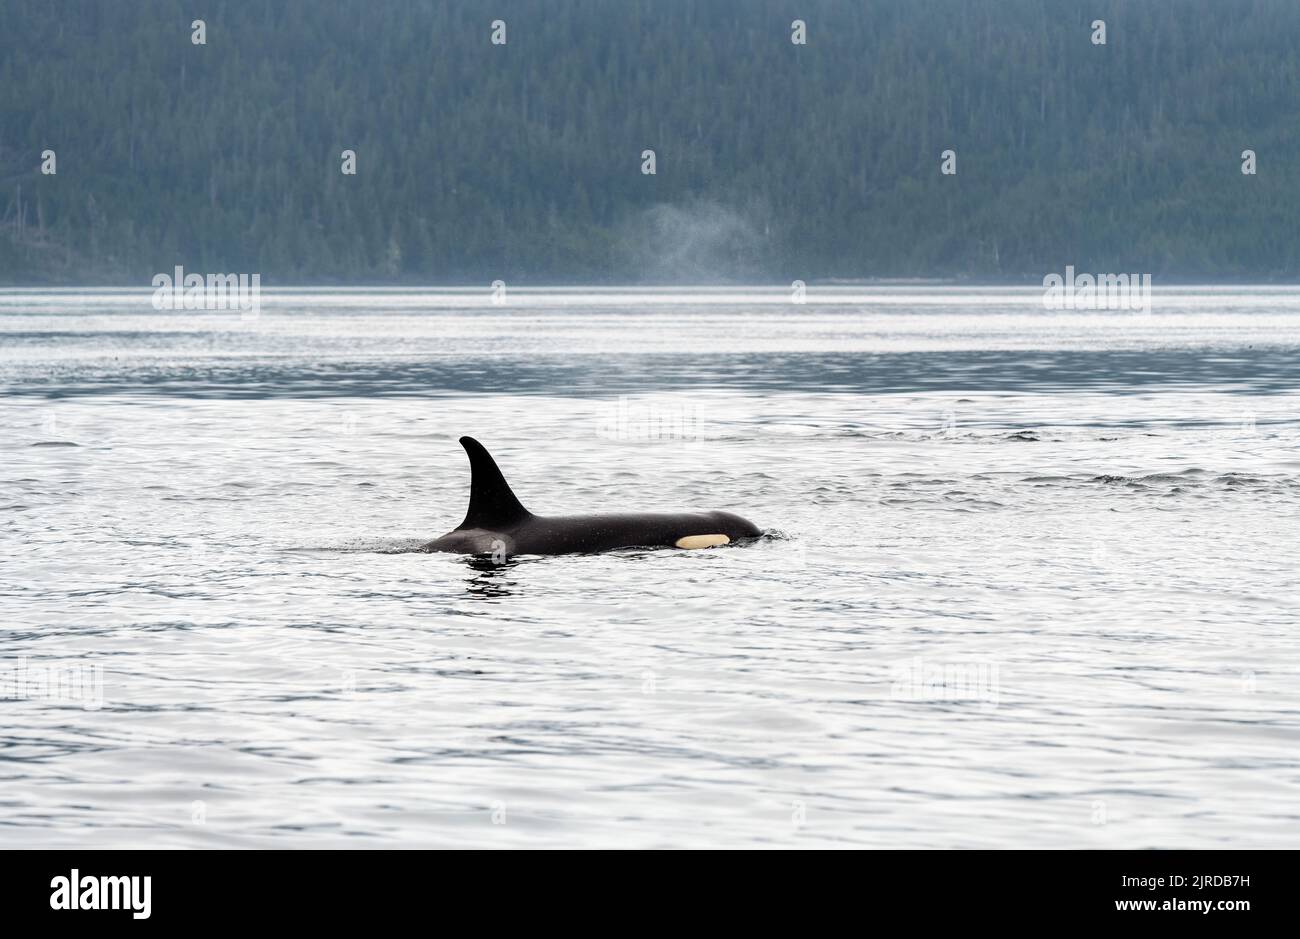 Orca or killer whale (Orcinus orca) on whale watching tour, Telegraph Cove, Vancouver Island, British Columbia, Canada. Stock Photo